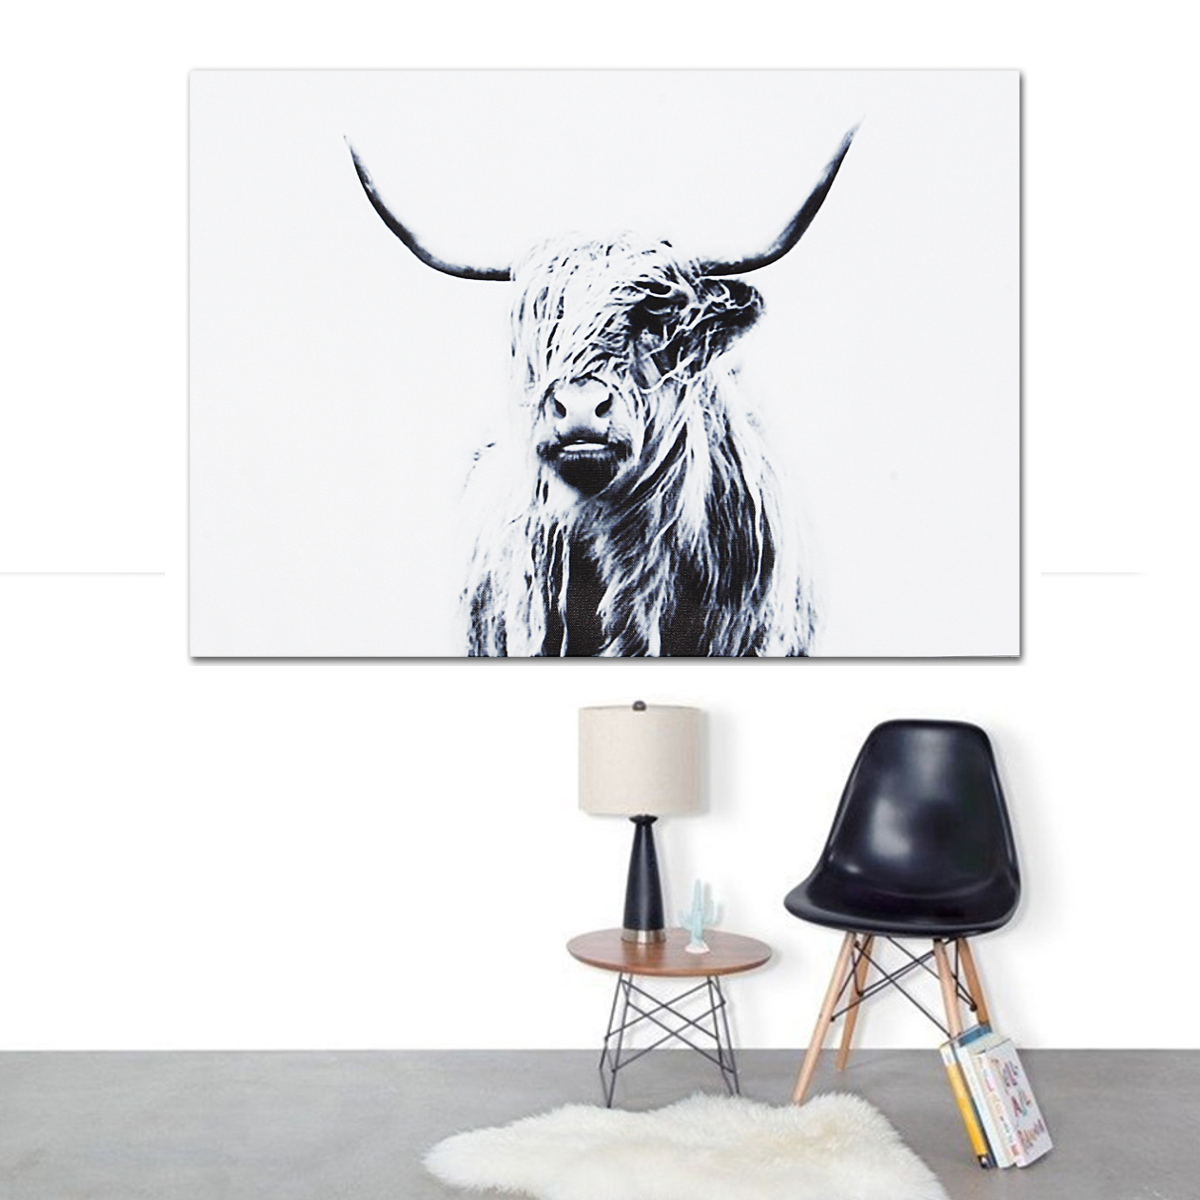 1-Piece-Highland-Cattle-Canvas-Painting-Wall-Decorative-Print-Art-Pictures-Frameless-Wall-Hanging-De-1733254-4